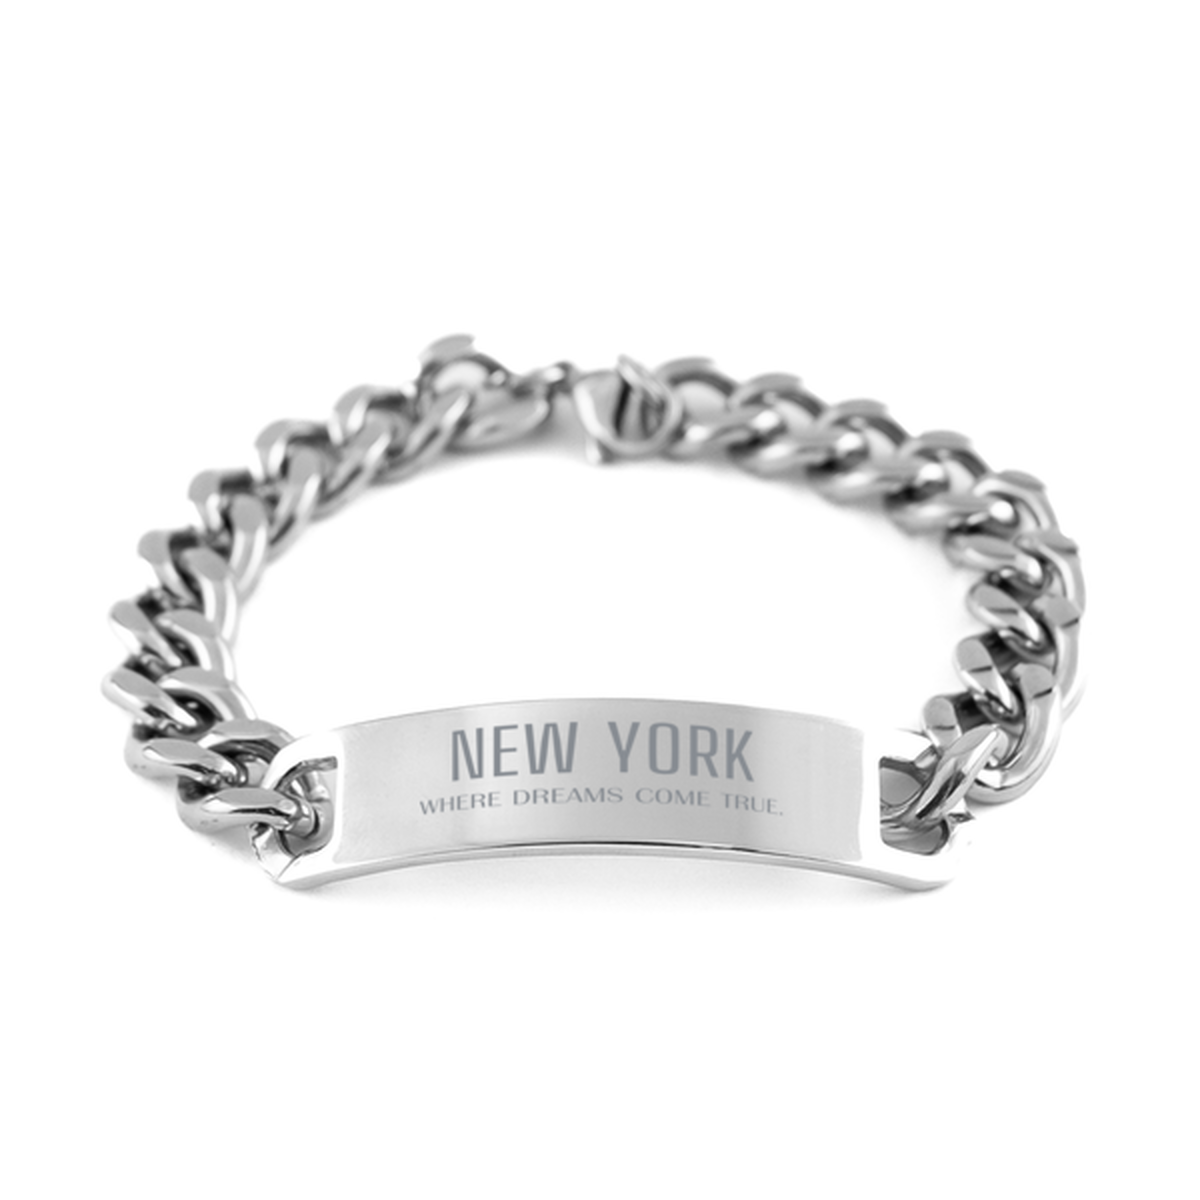 Love New York State Cuban Chain Stainless Steel Bracelet, New York Where dreams come true, Birthday Inspirational Gifts For New York Men, Women, Friends